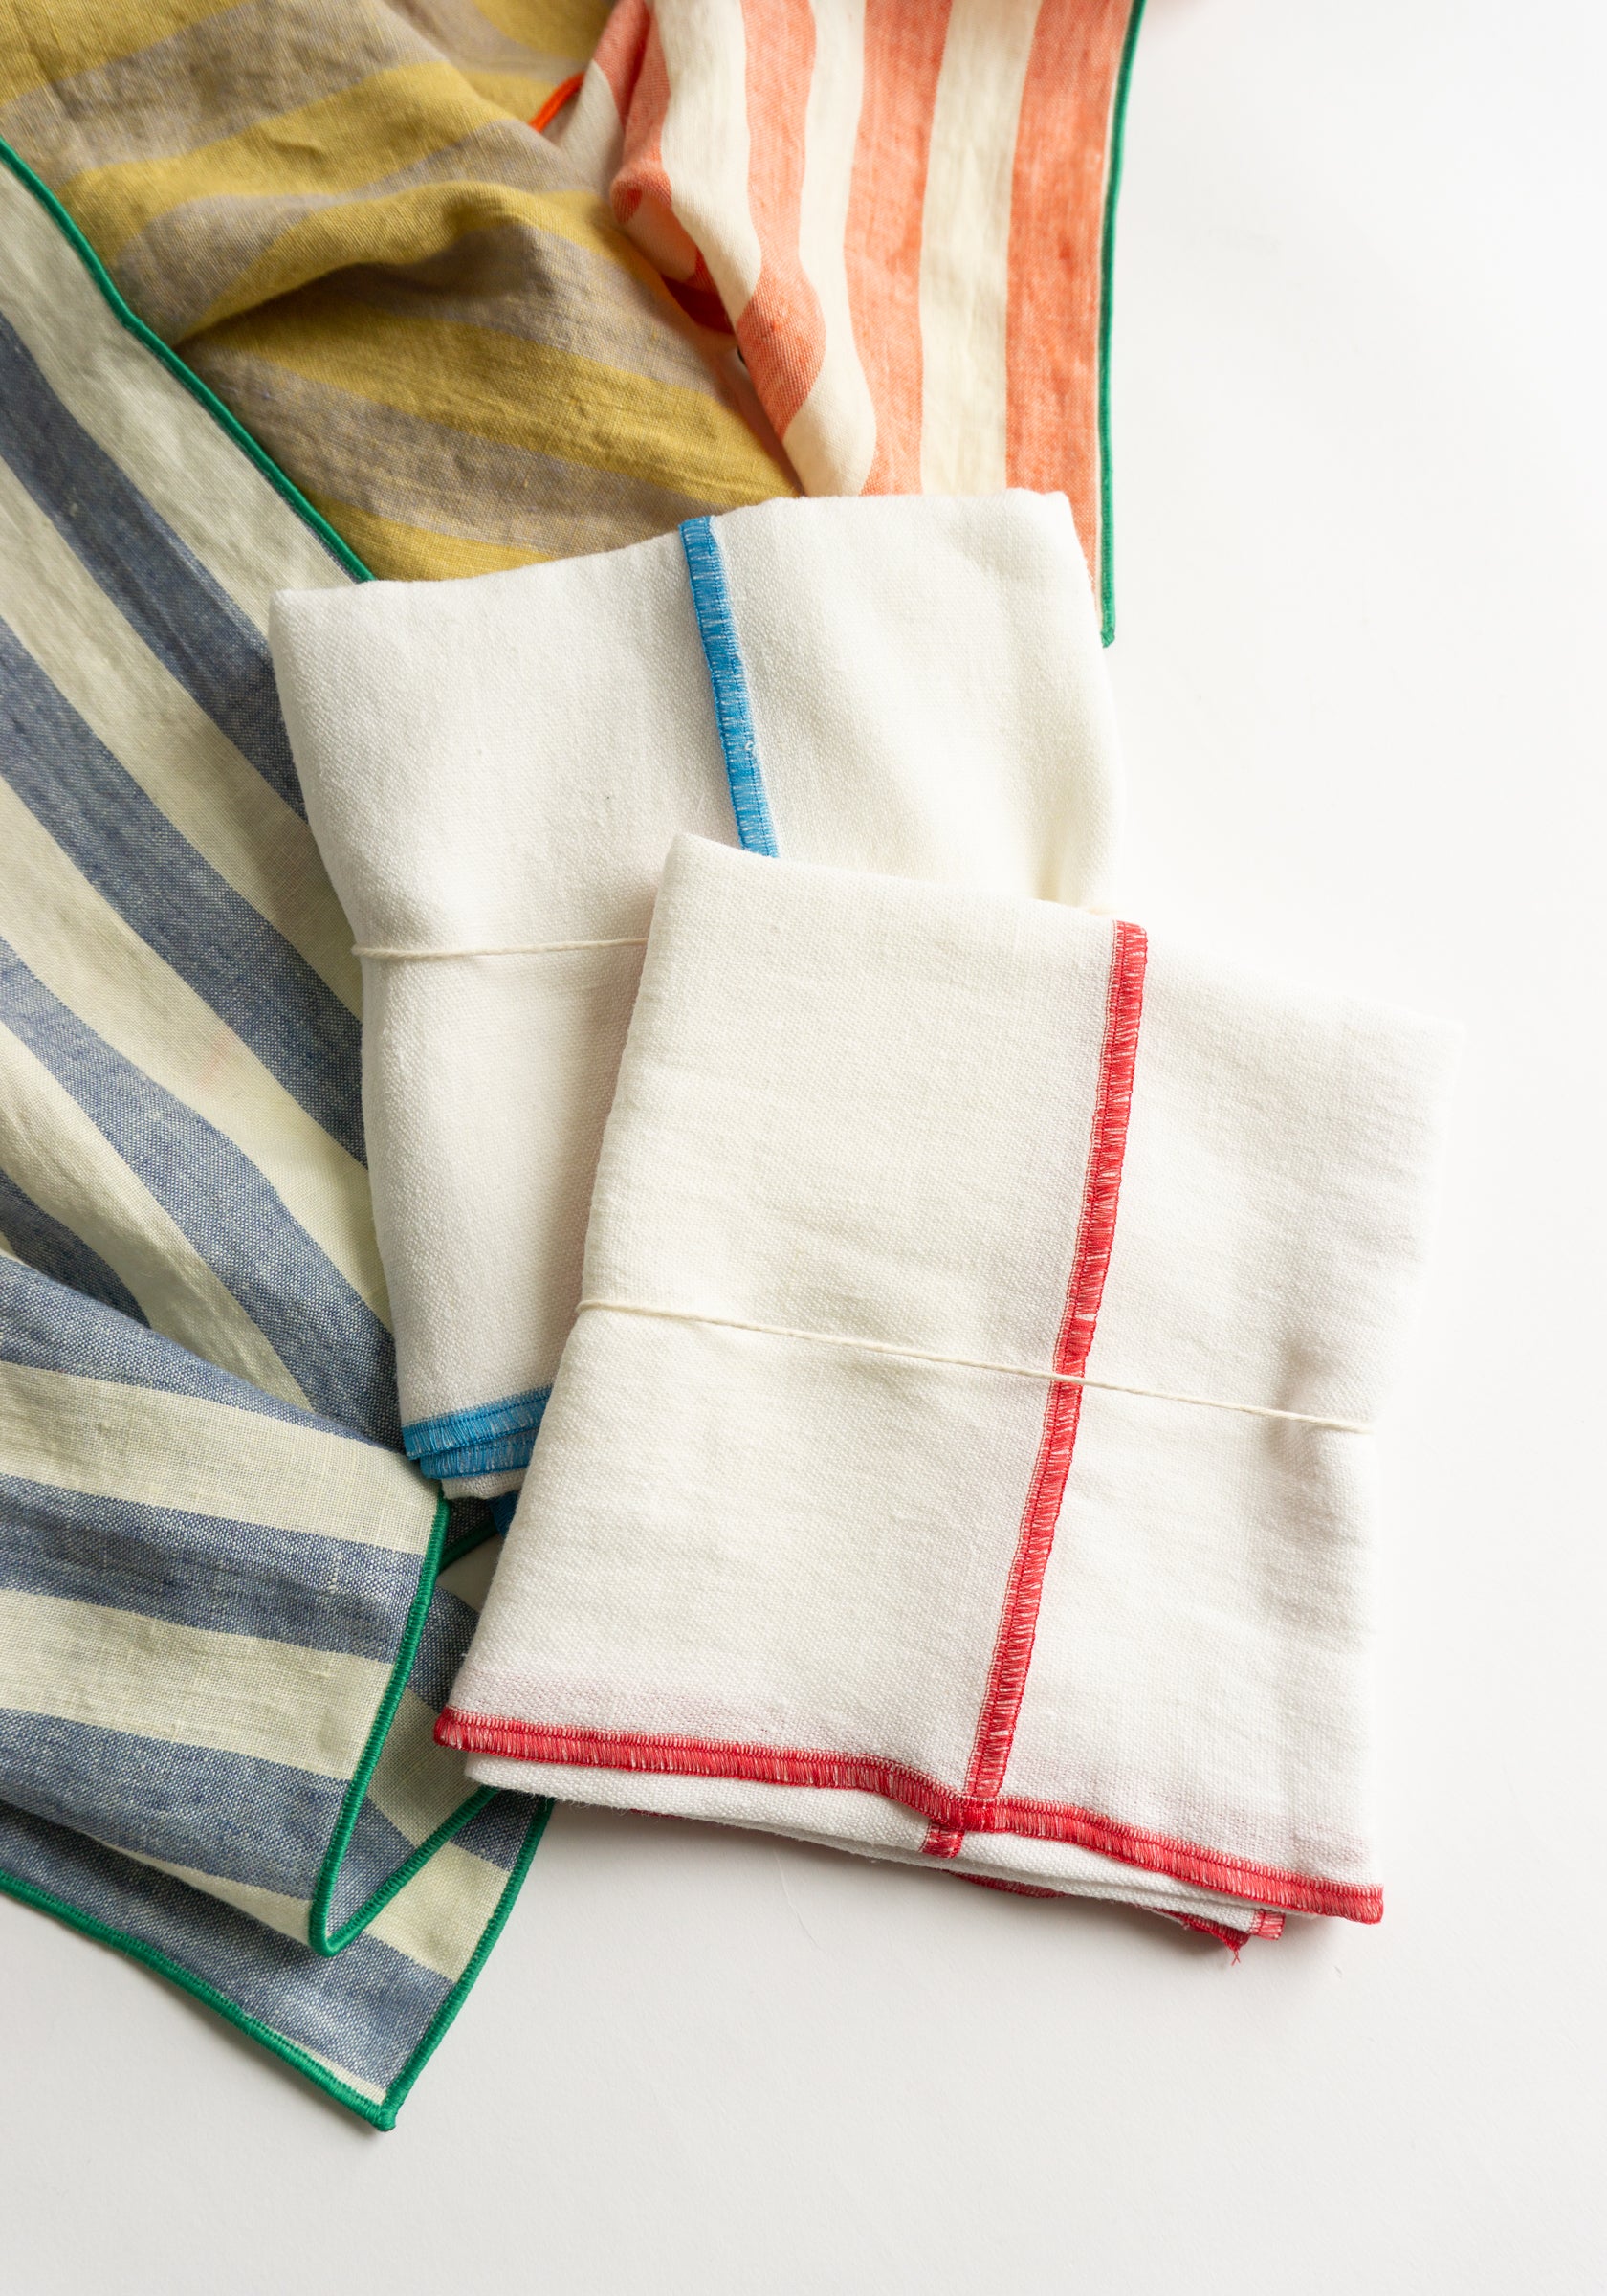 Checked Linen Kitchen Towel, Natural Washed Linen Tea Towels